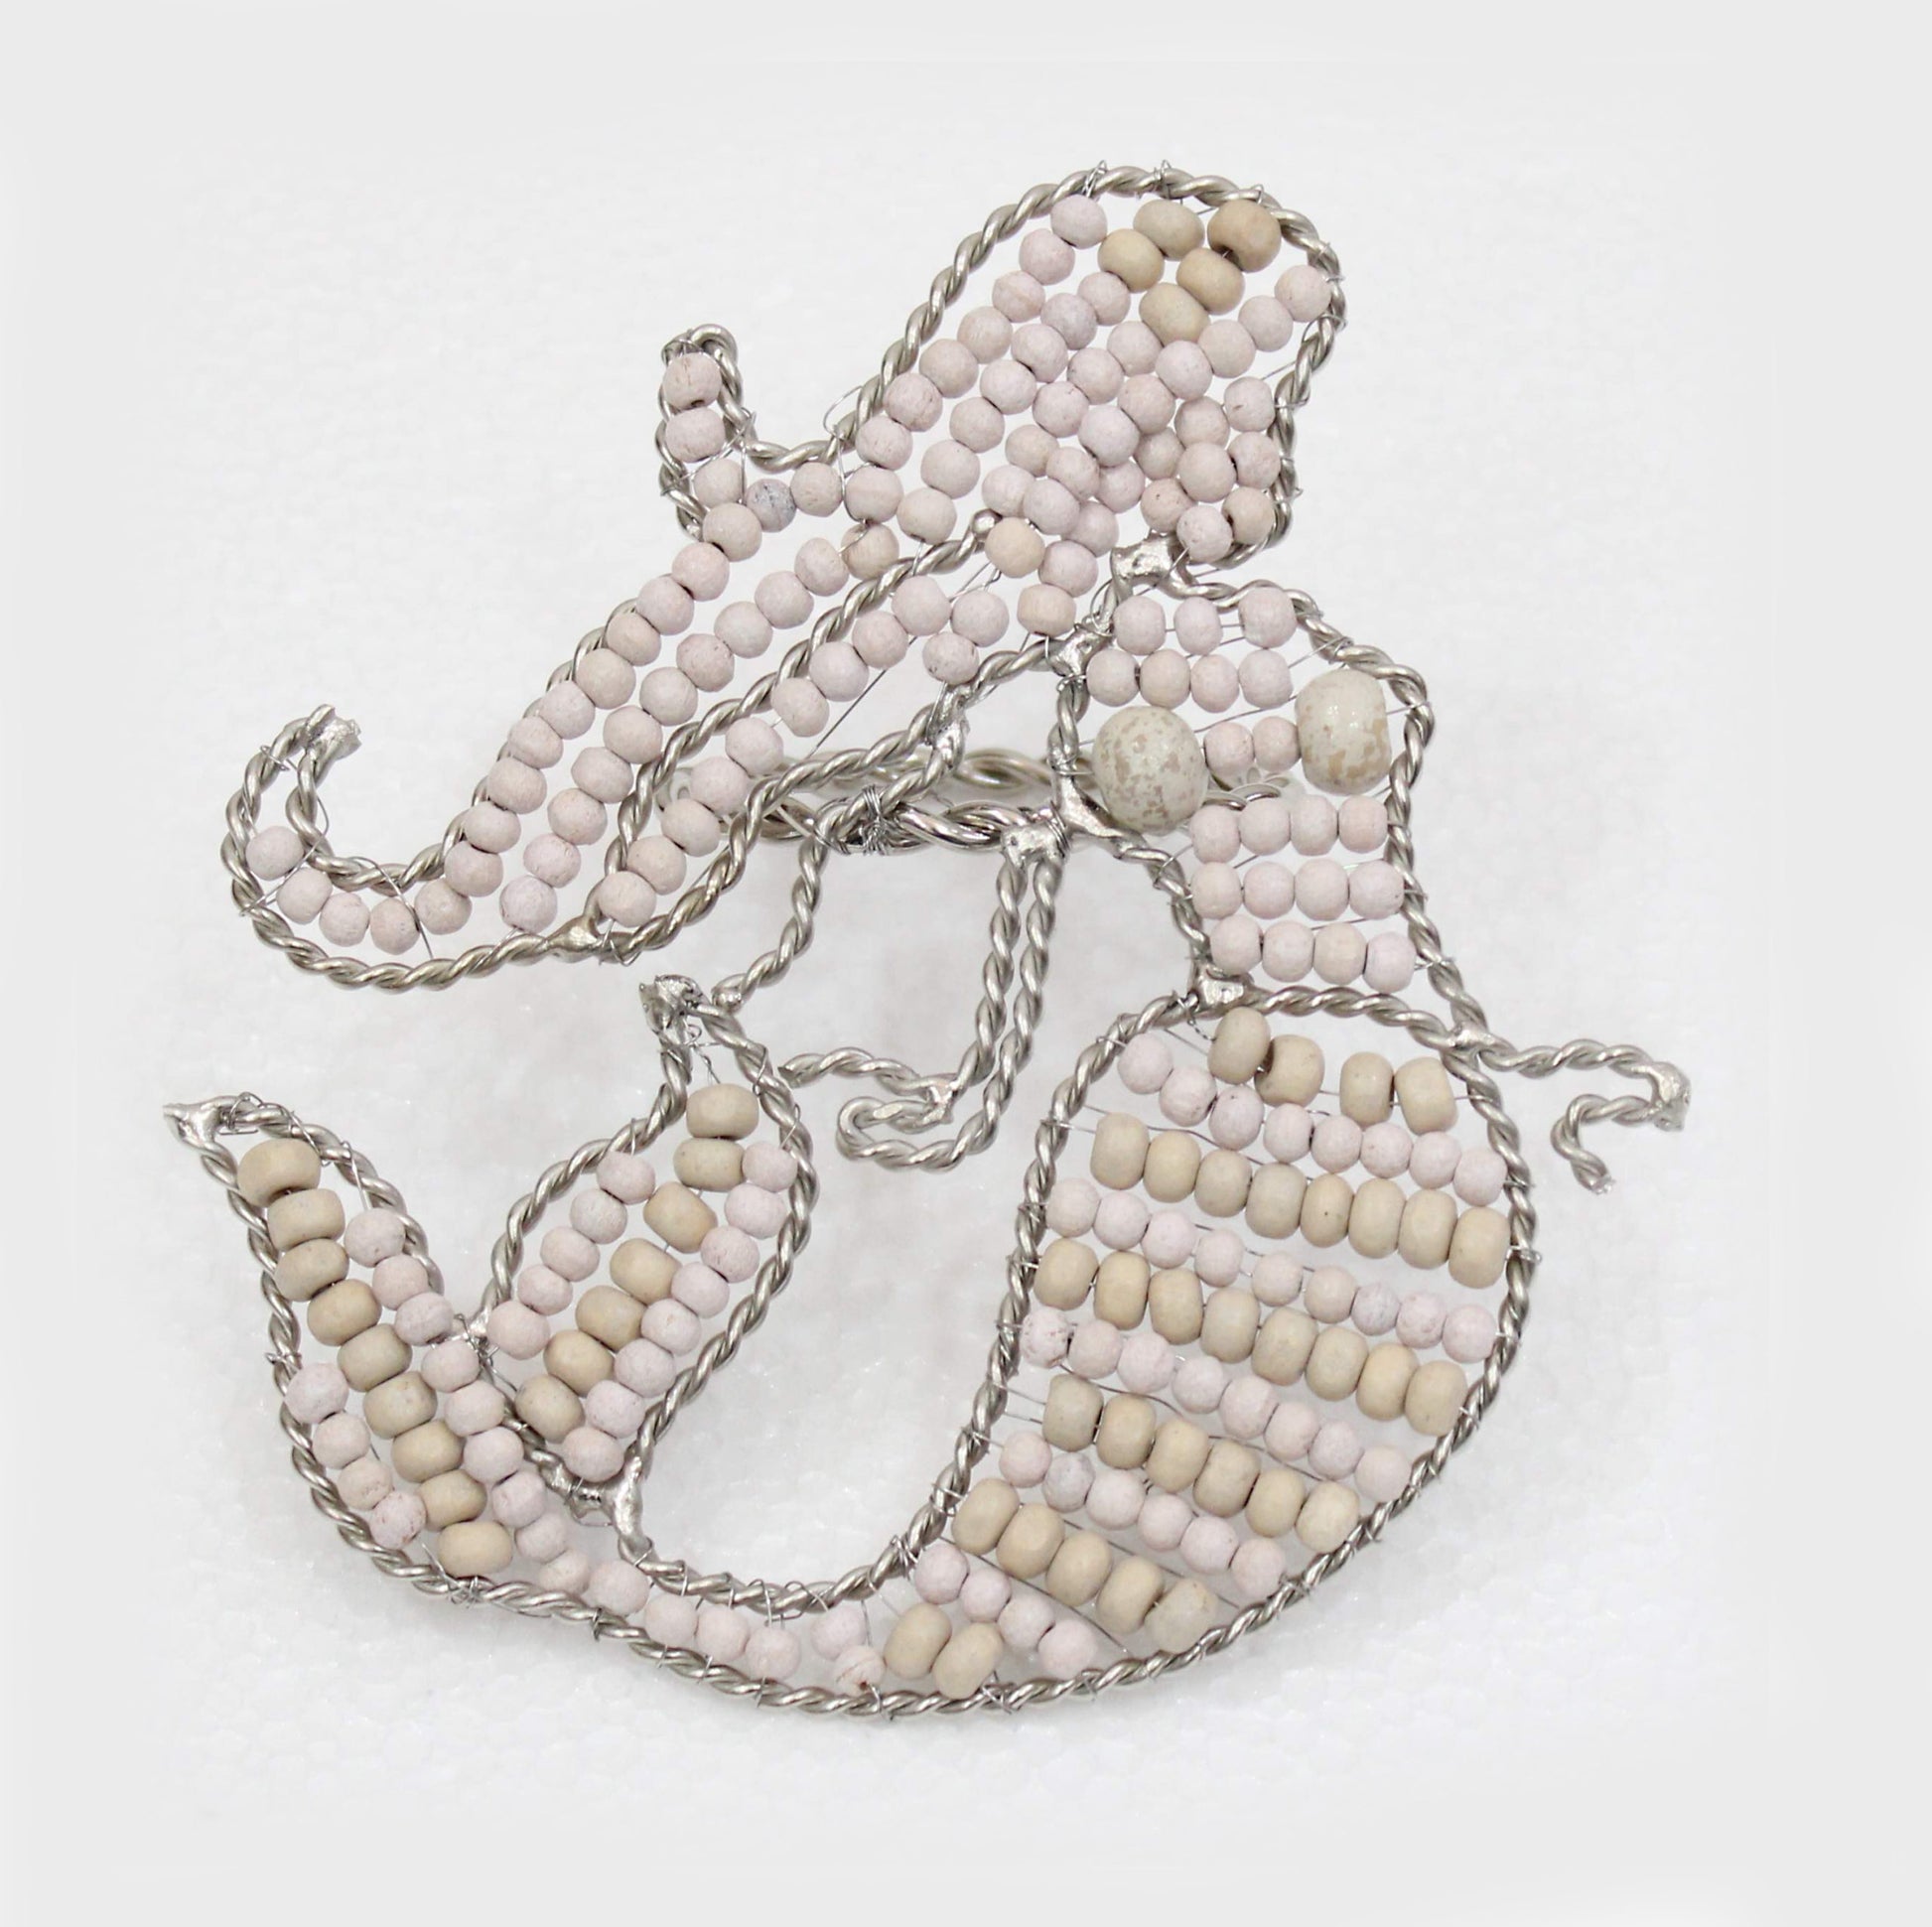 Mermaid shaped napkin ring crafted of natural beads.